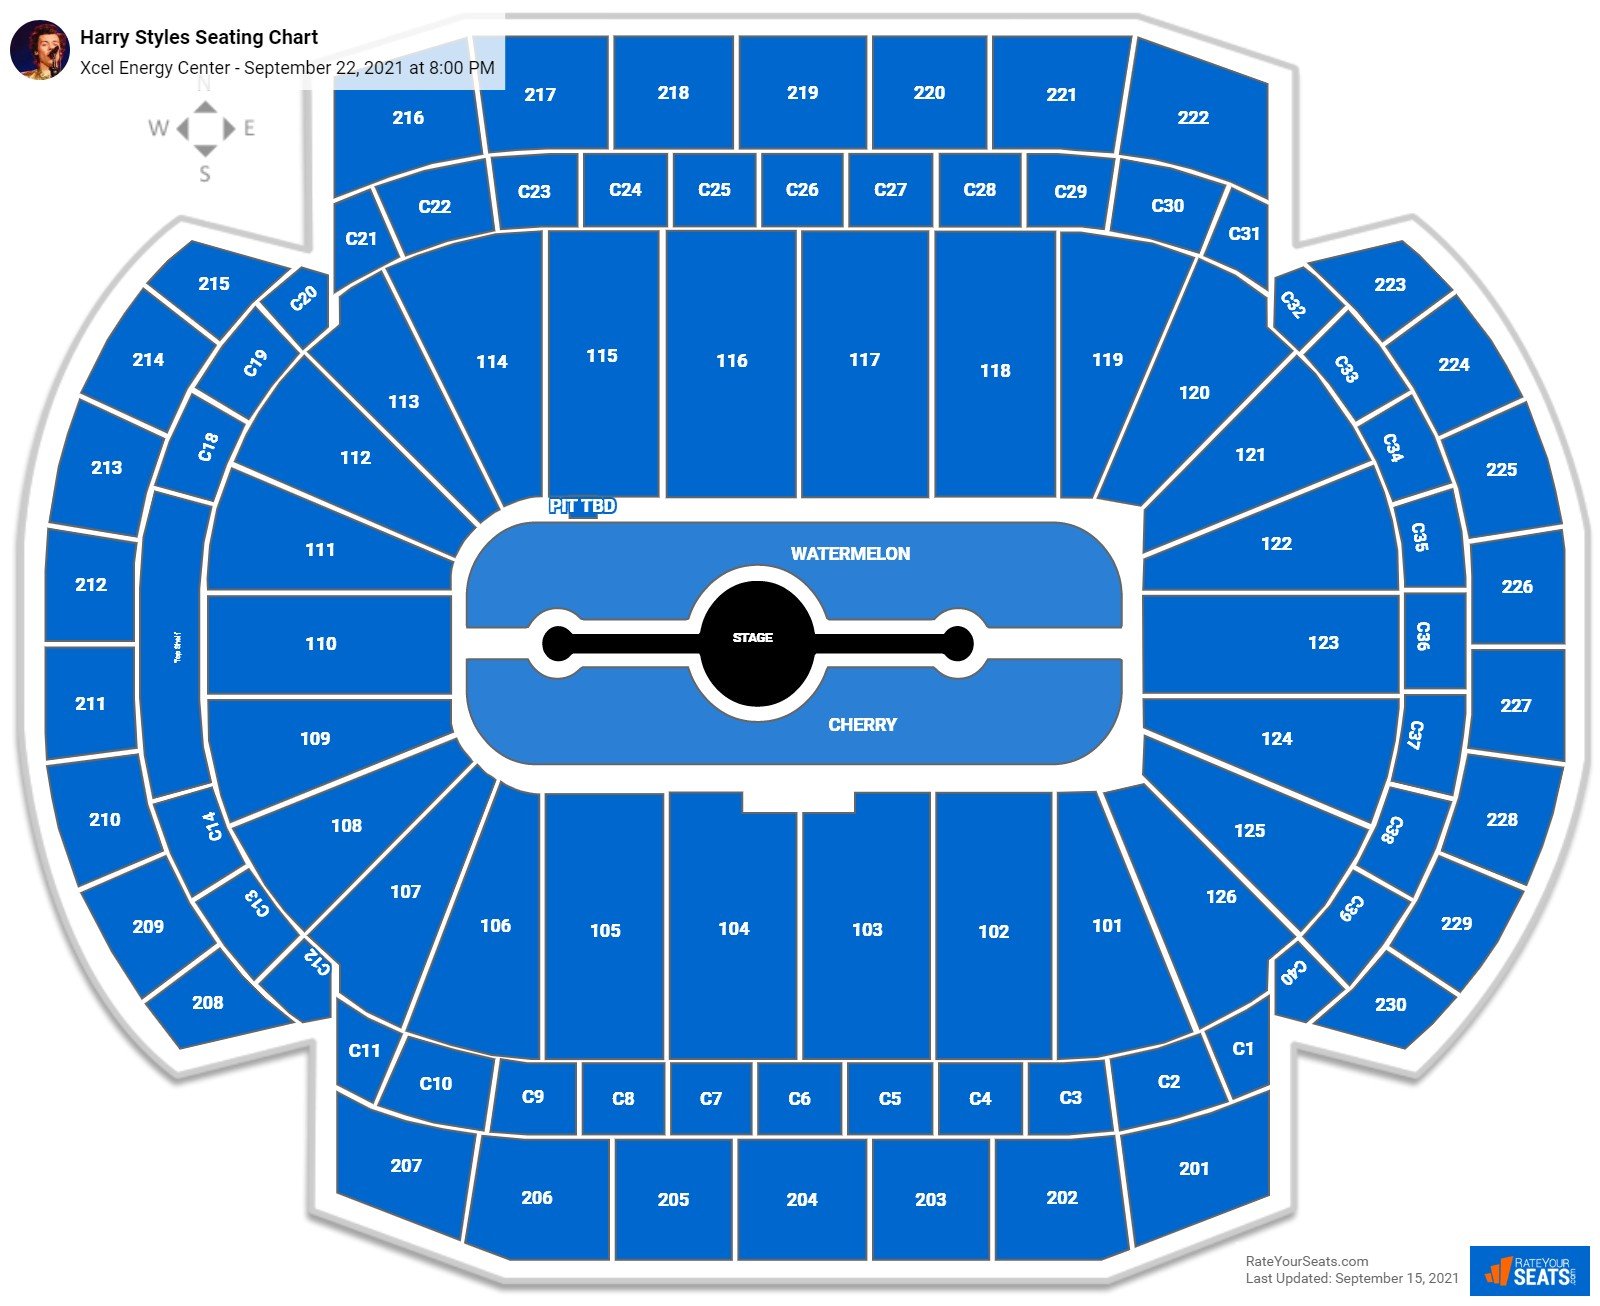 Xcel Energy Center Seating Charts for Concerts RateYourSeats com